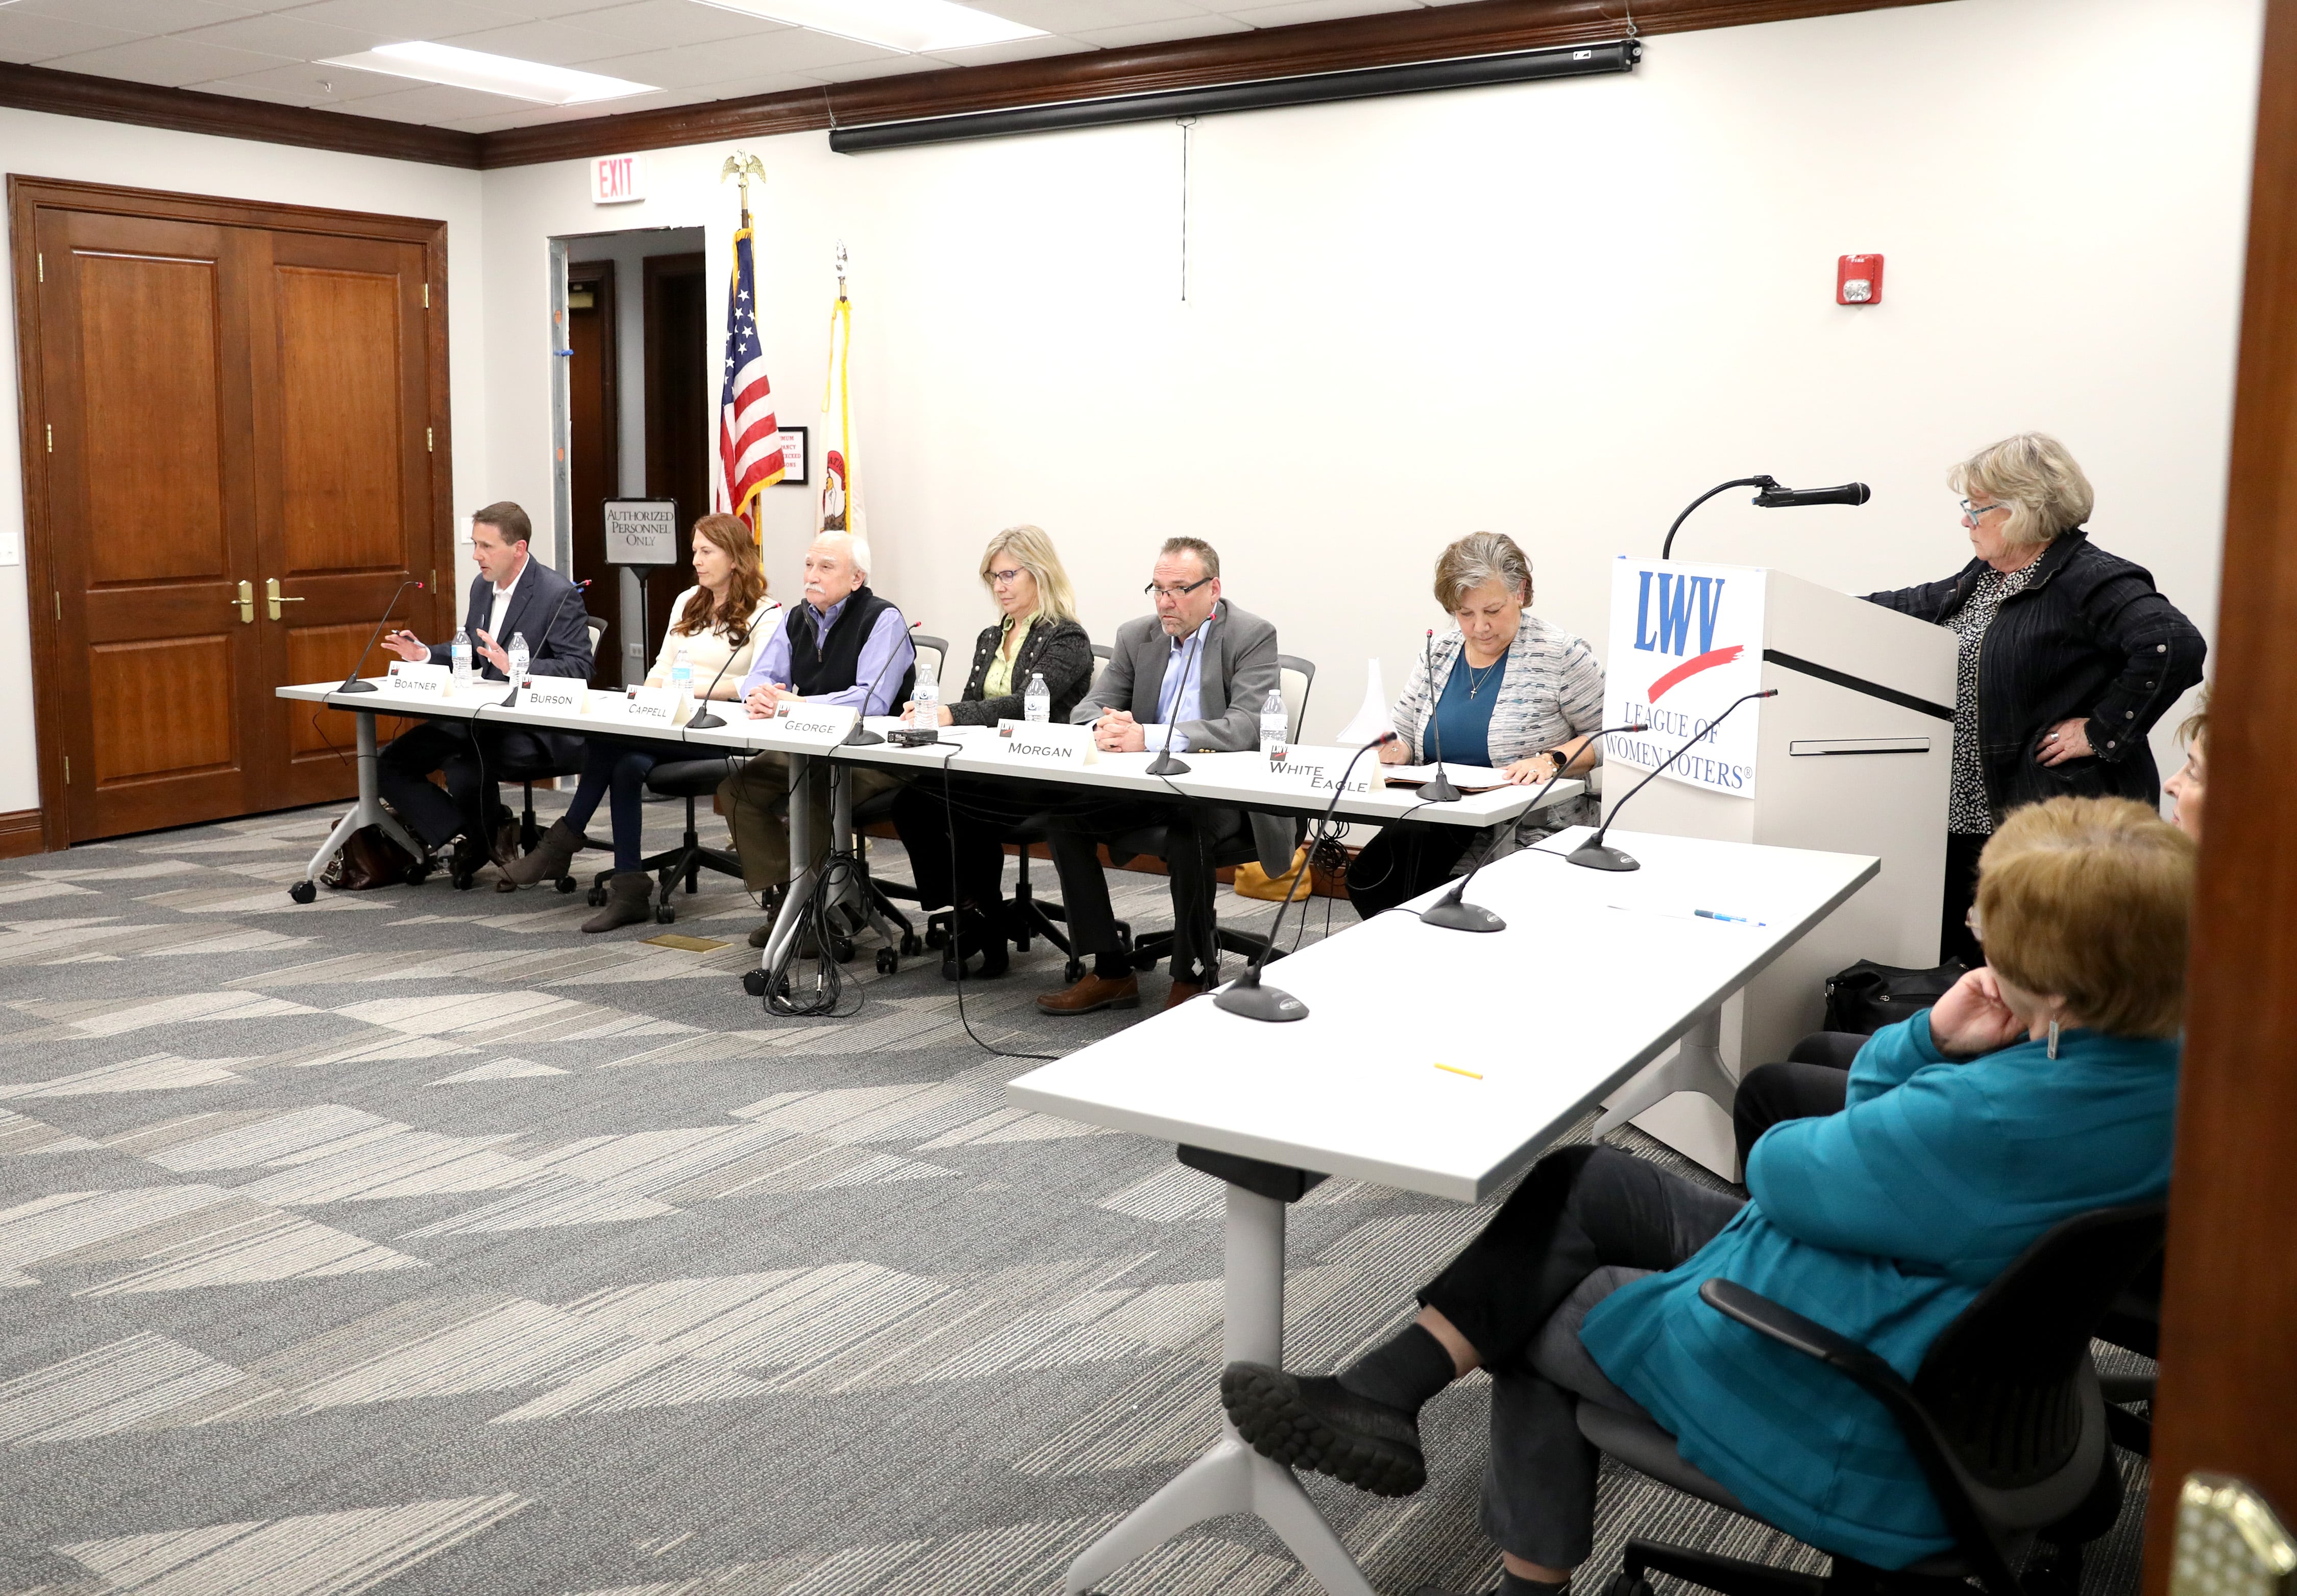 Photos: Candidate forum in Campton Hills